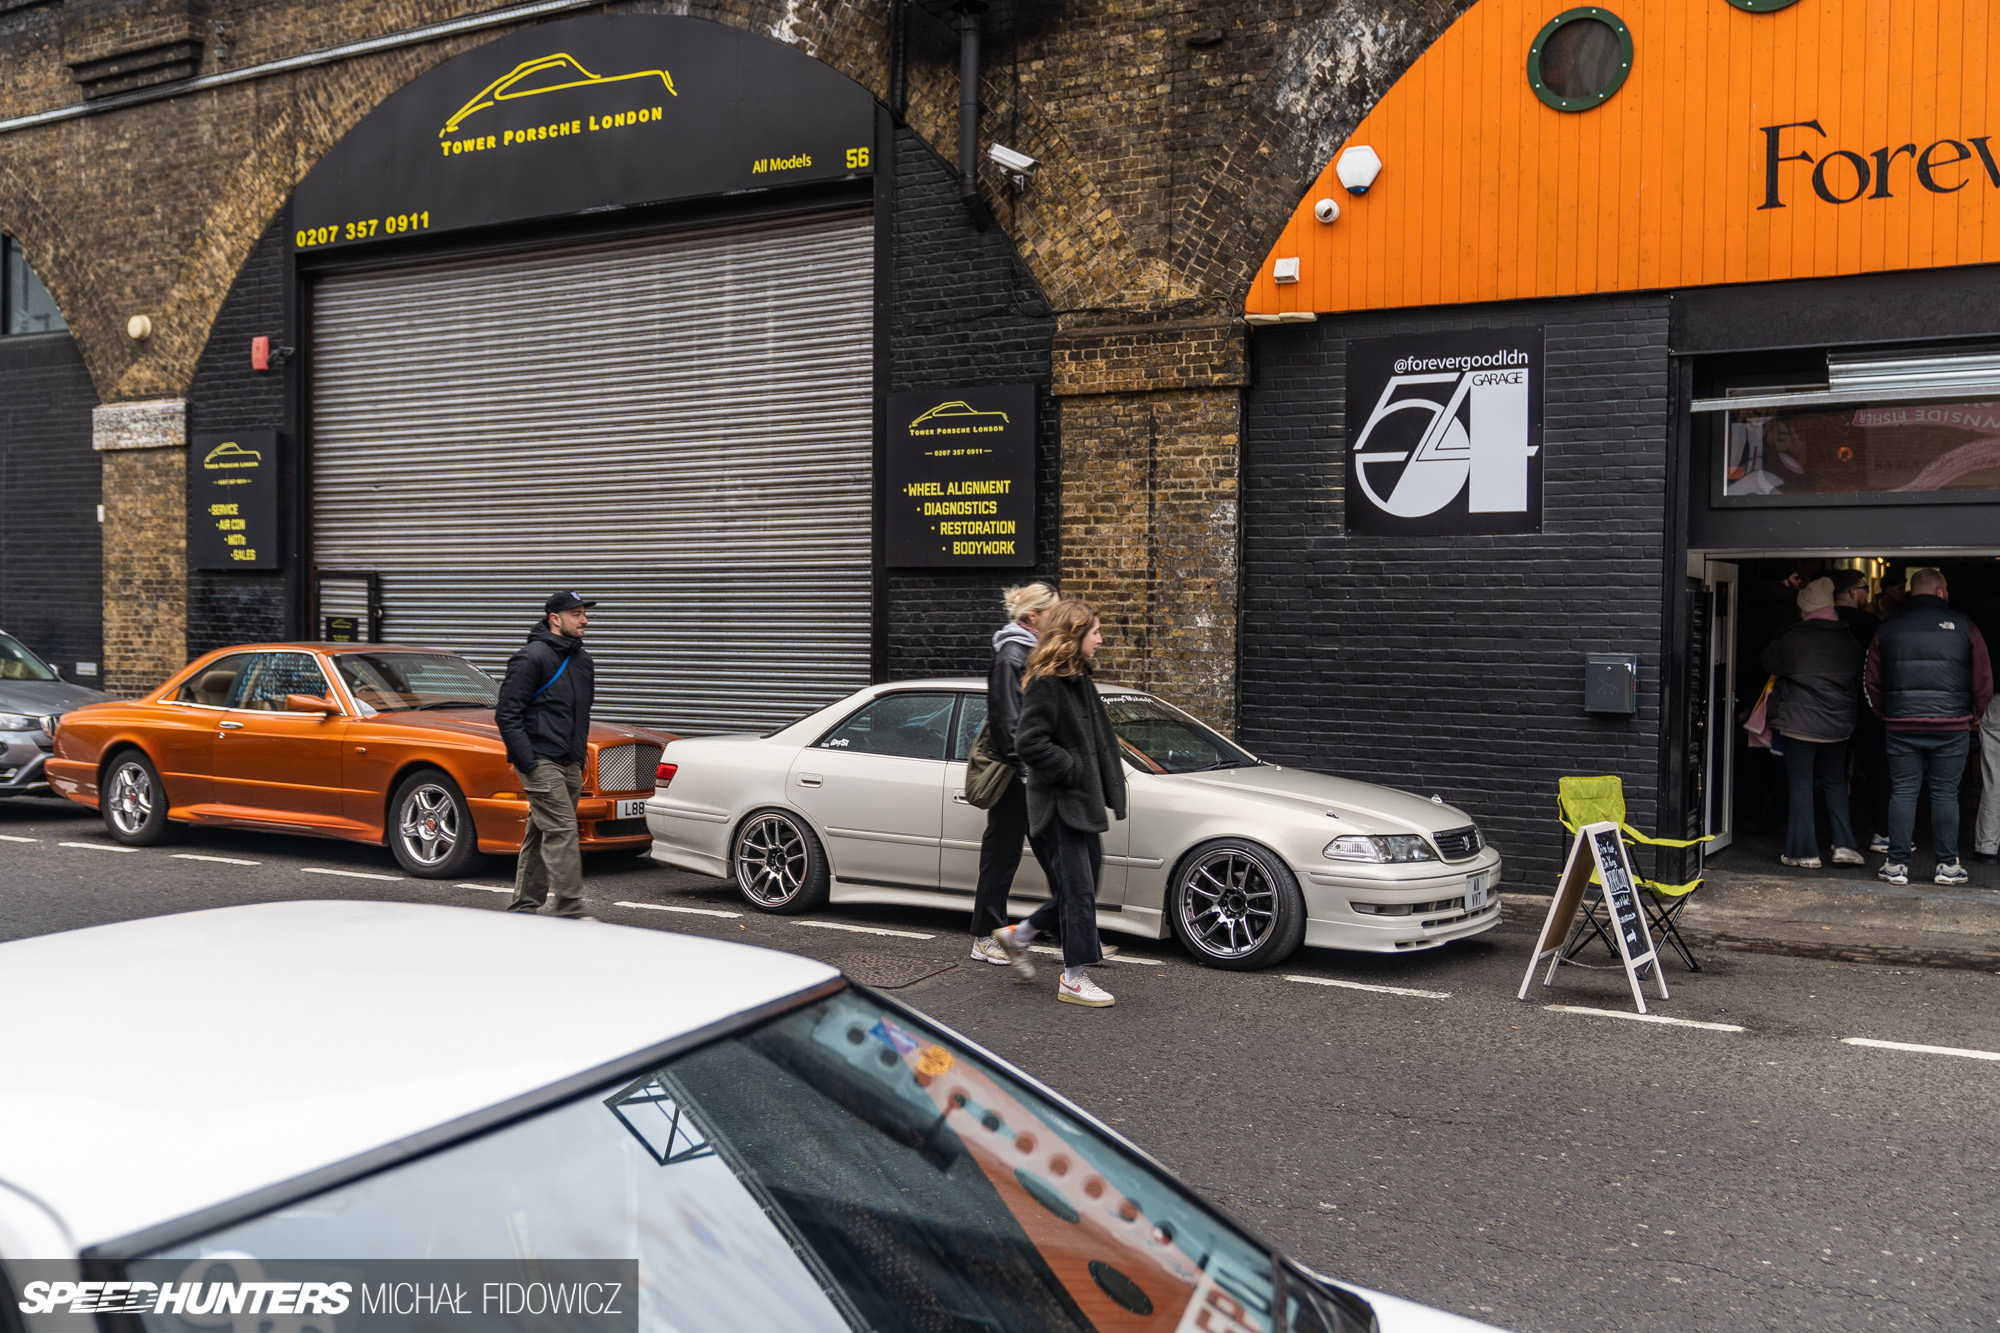 ulez, of, mildly, micol, london, interesting, good, forevergood, forever, coffee, cars, car culture, and, curating london’s car culture with a micol morning